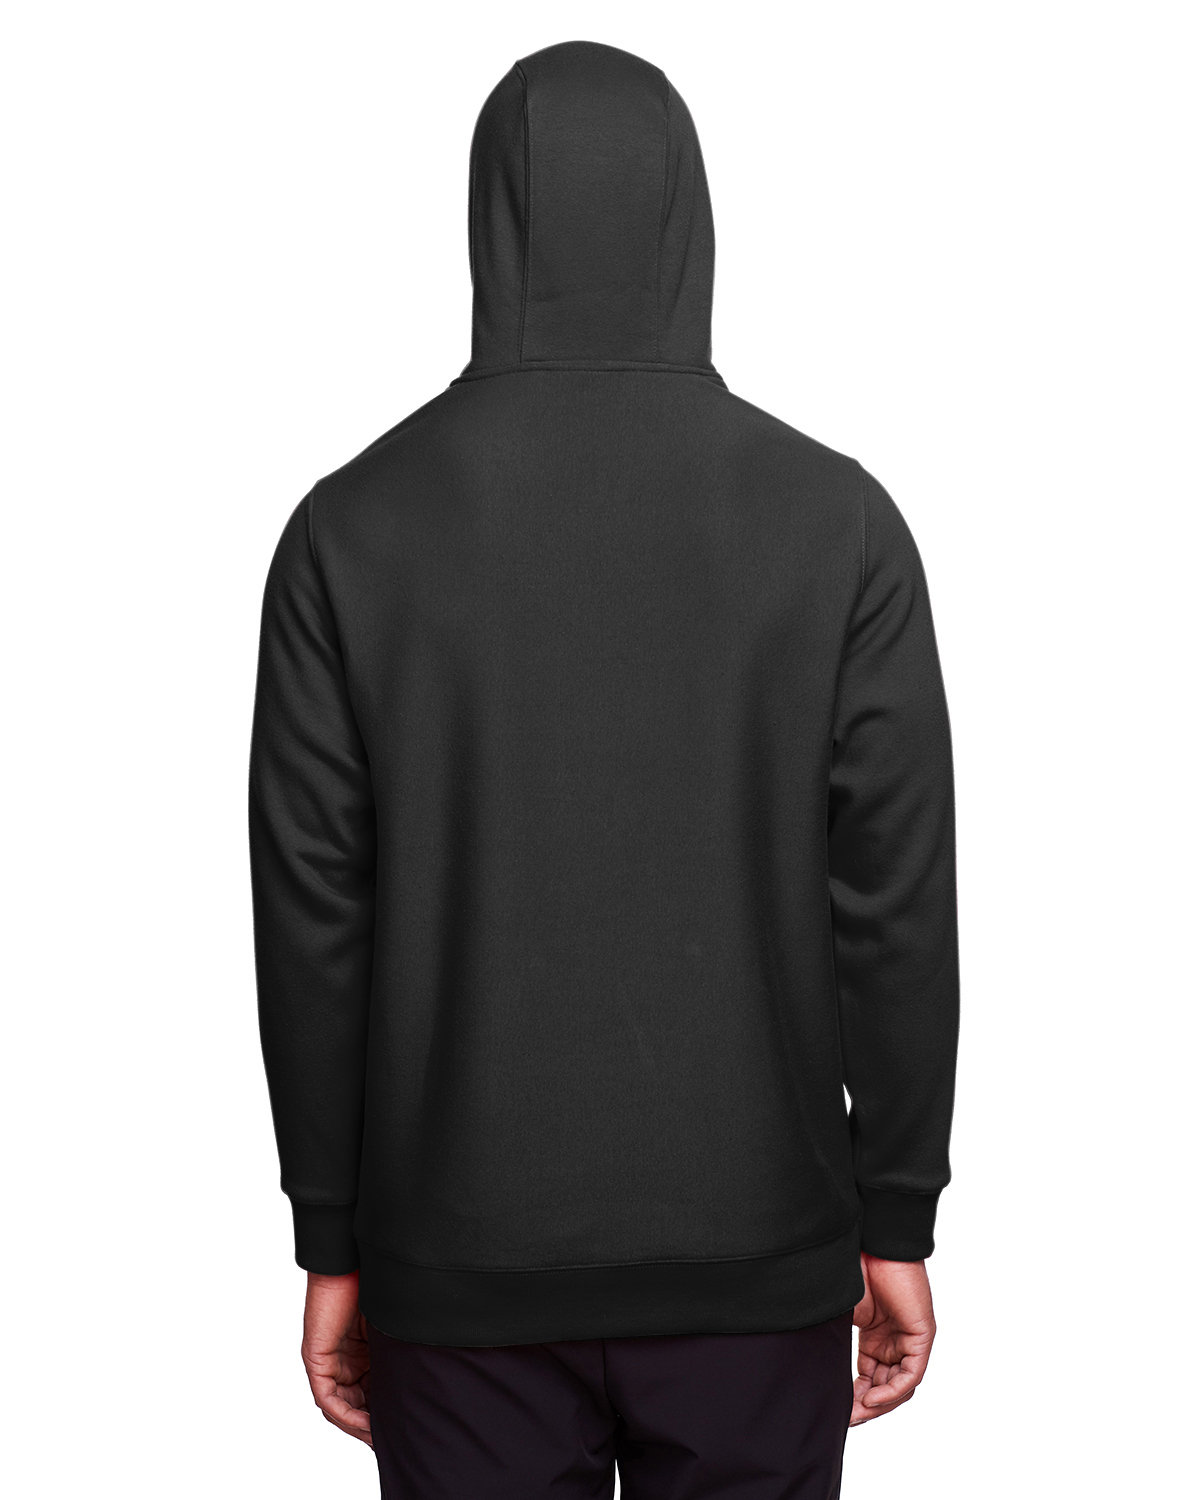 Team 365 Adult Zone HydroSport™ Heavyweight Pullover Hooded